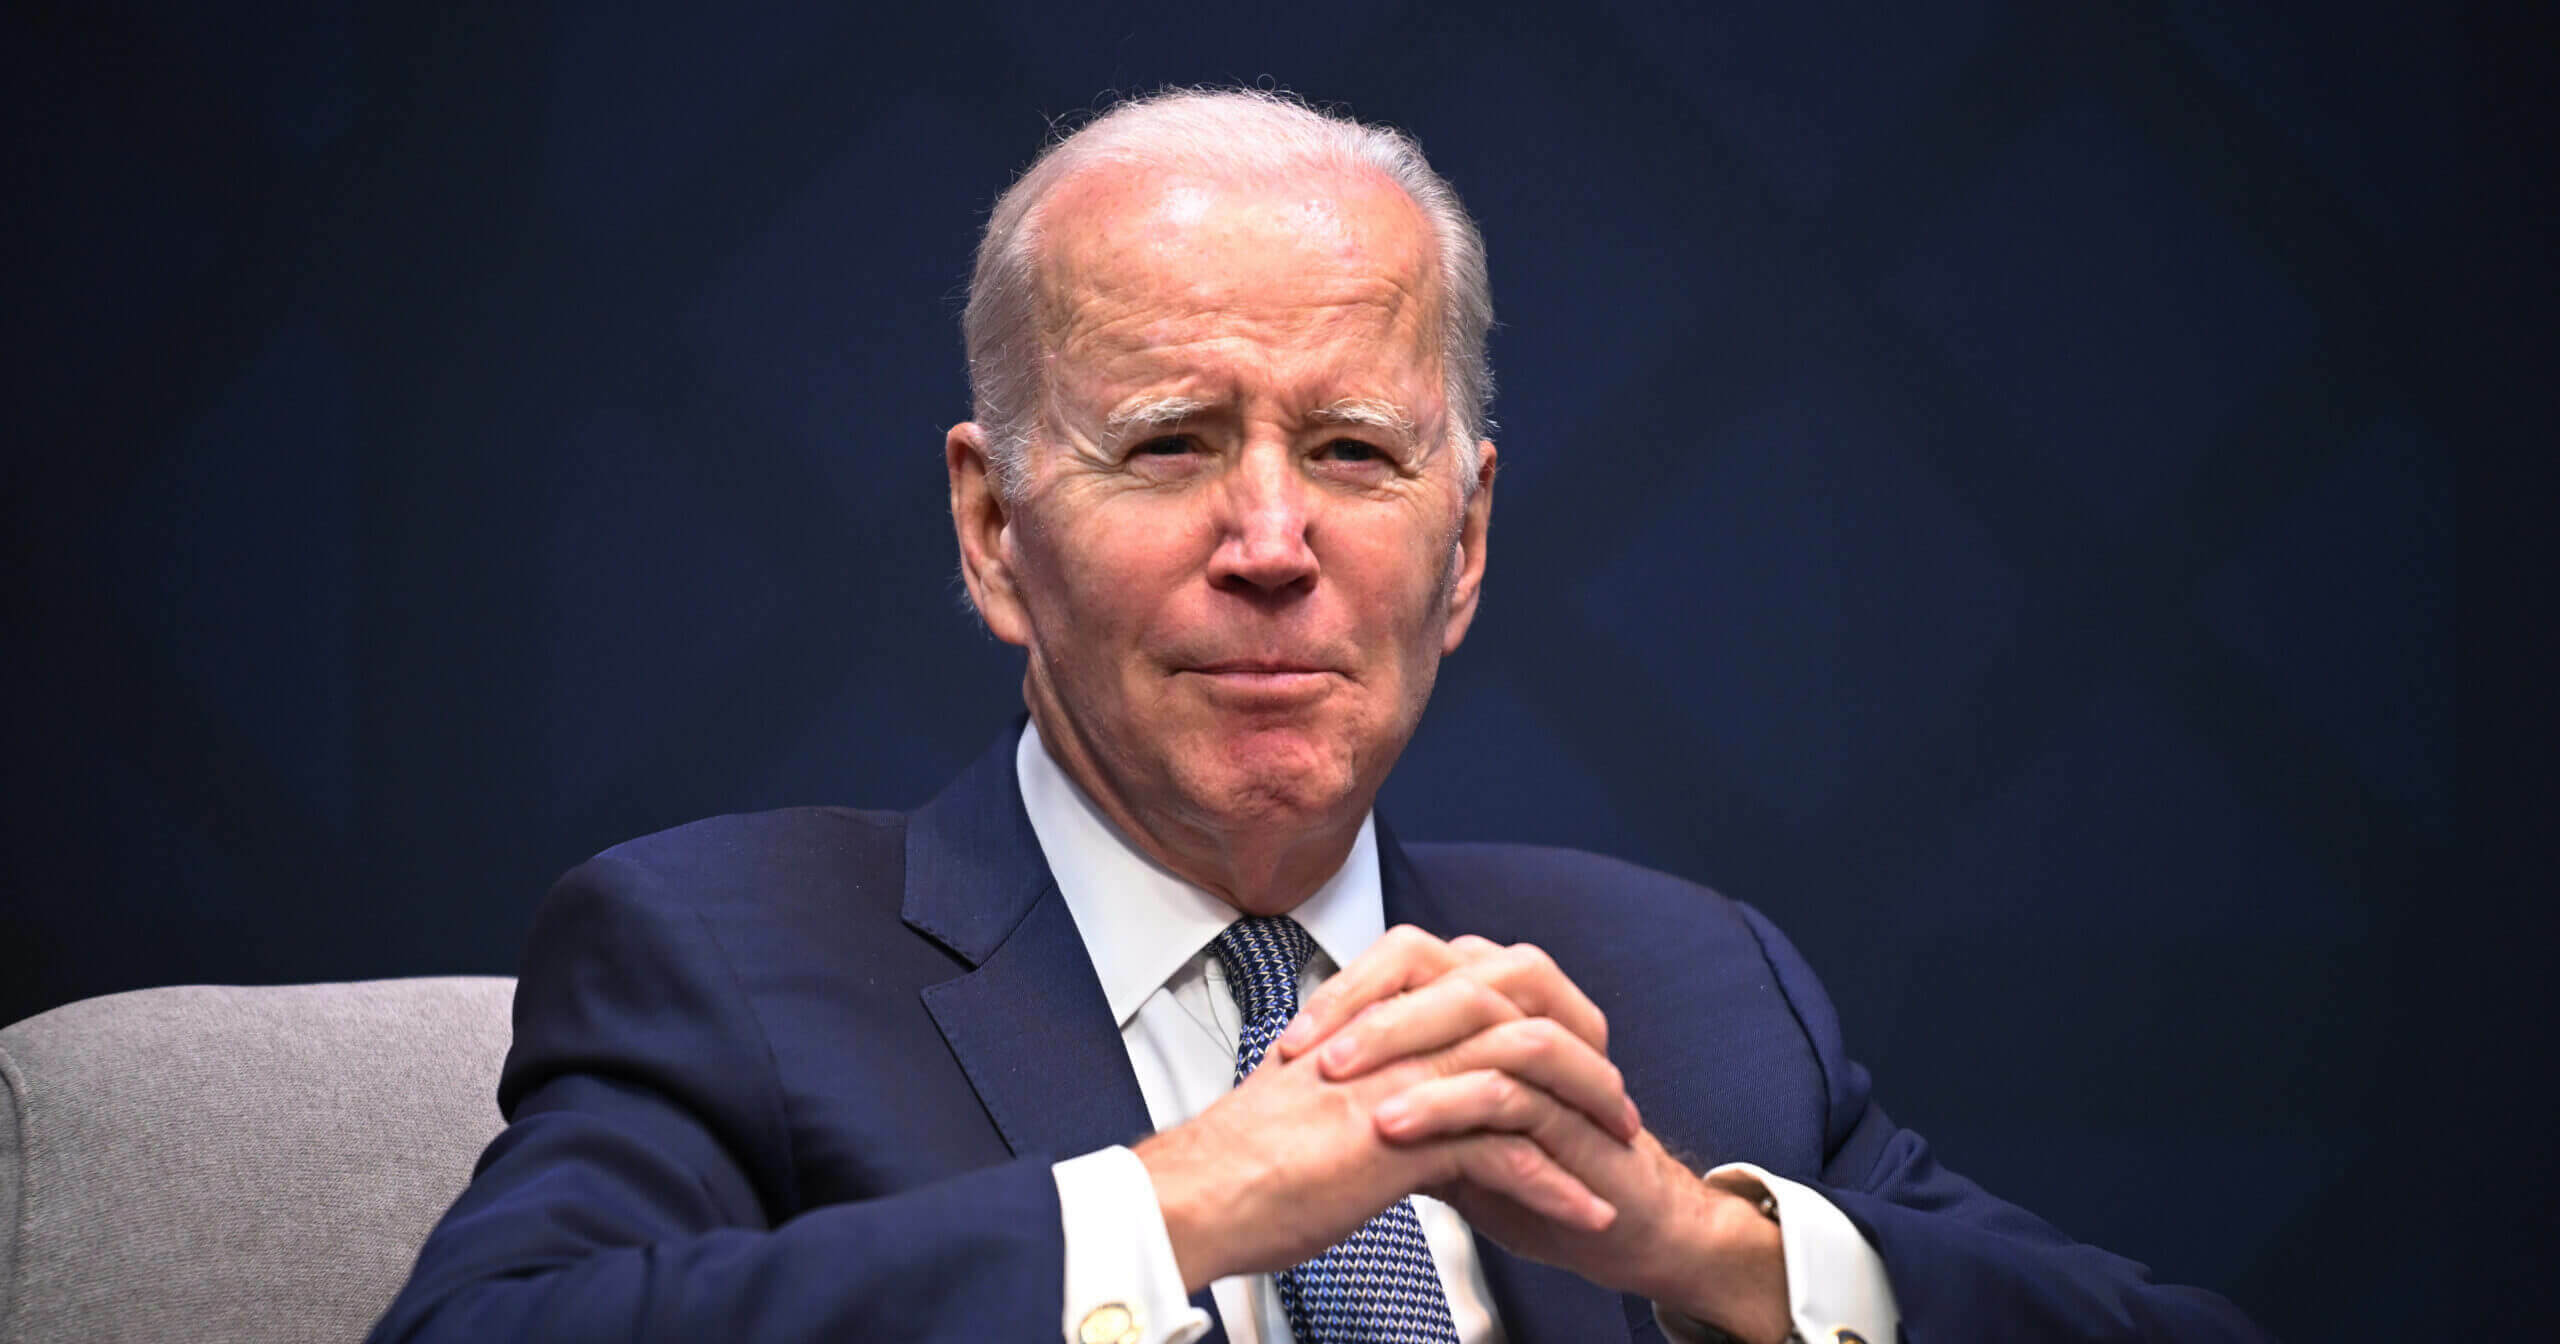 Morning Greatness: Joe Biden Vows to Prevent Future Bank Collapses Under His Watch › American Greatness